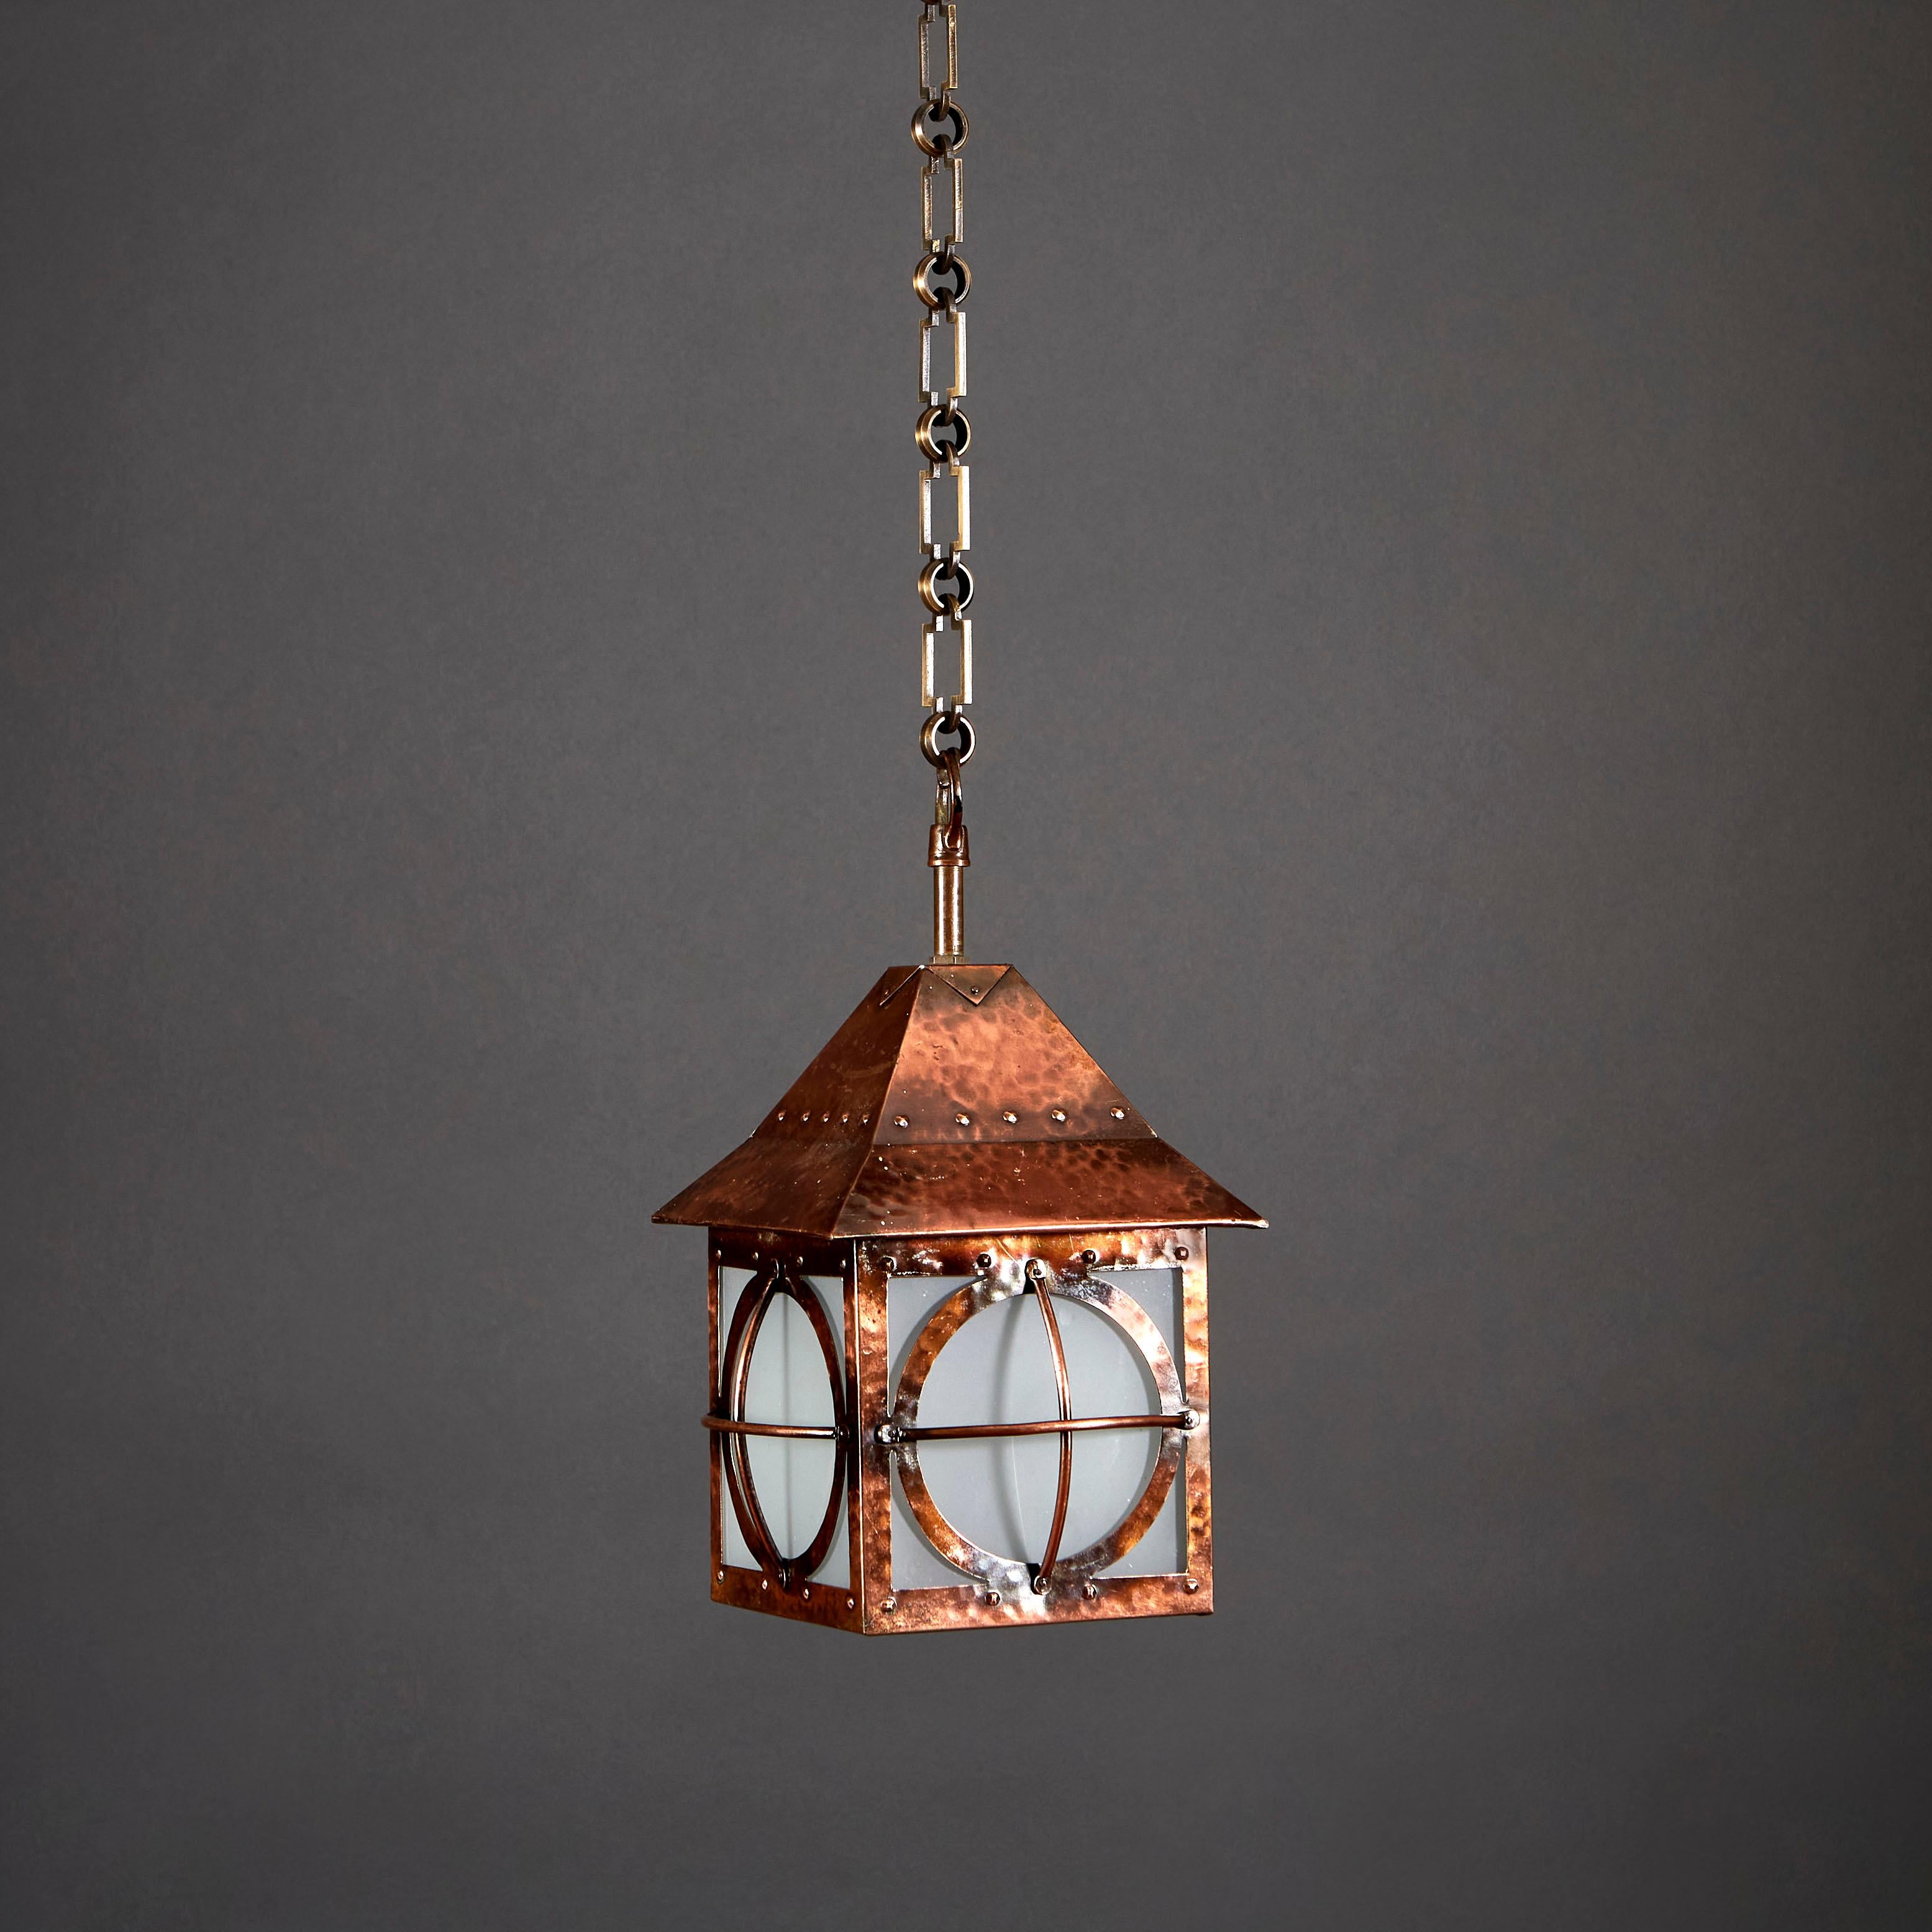 A late 19th Century Arts & Crafts copper hanging lantern with canopy and glazed sides.

Currently wired for the UK. Please enquire for rewiring services.
Chain available upon request; please contact us for details.